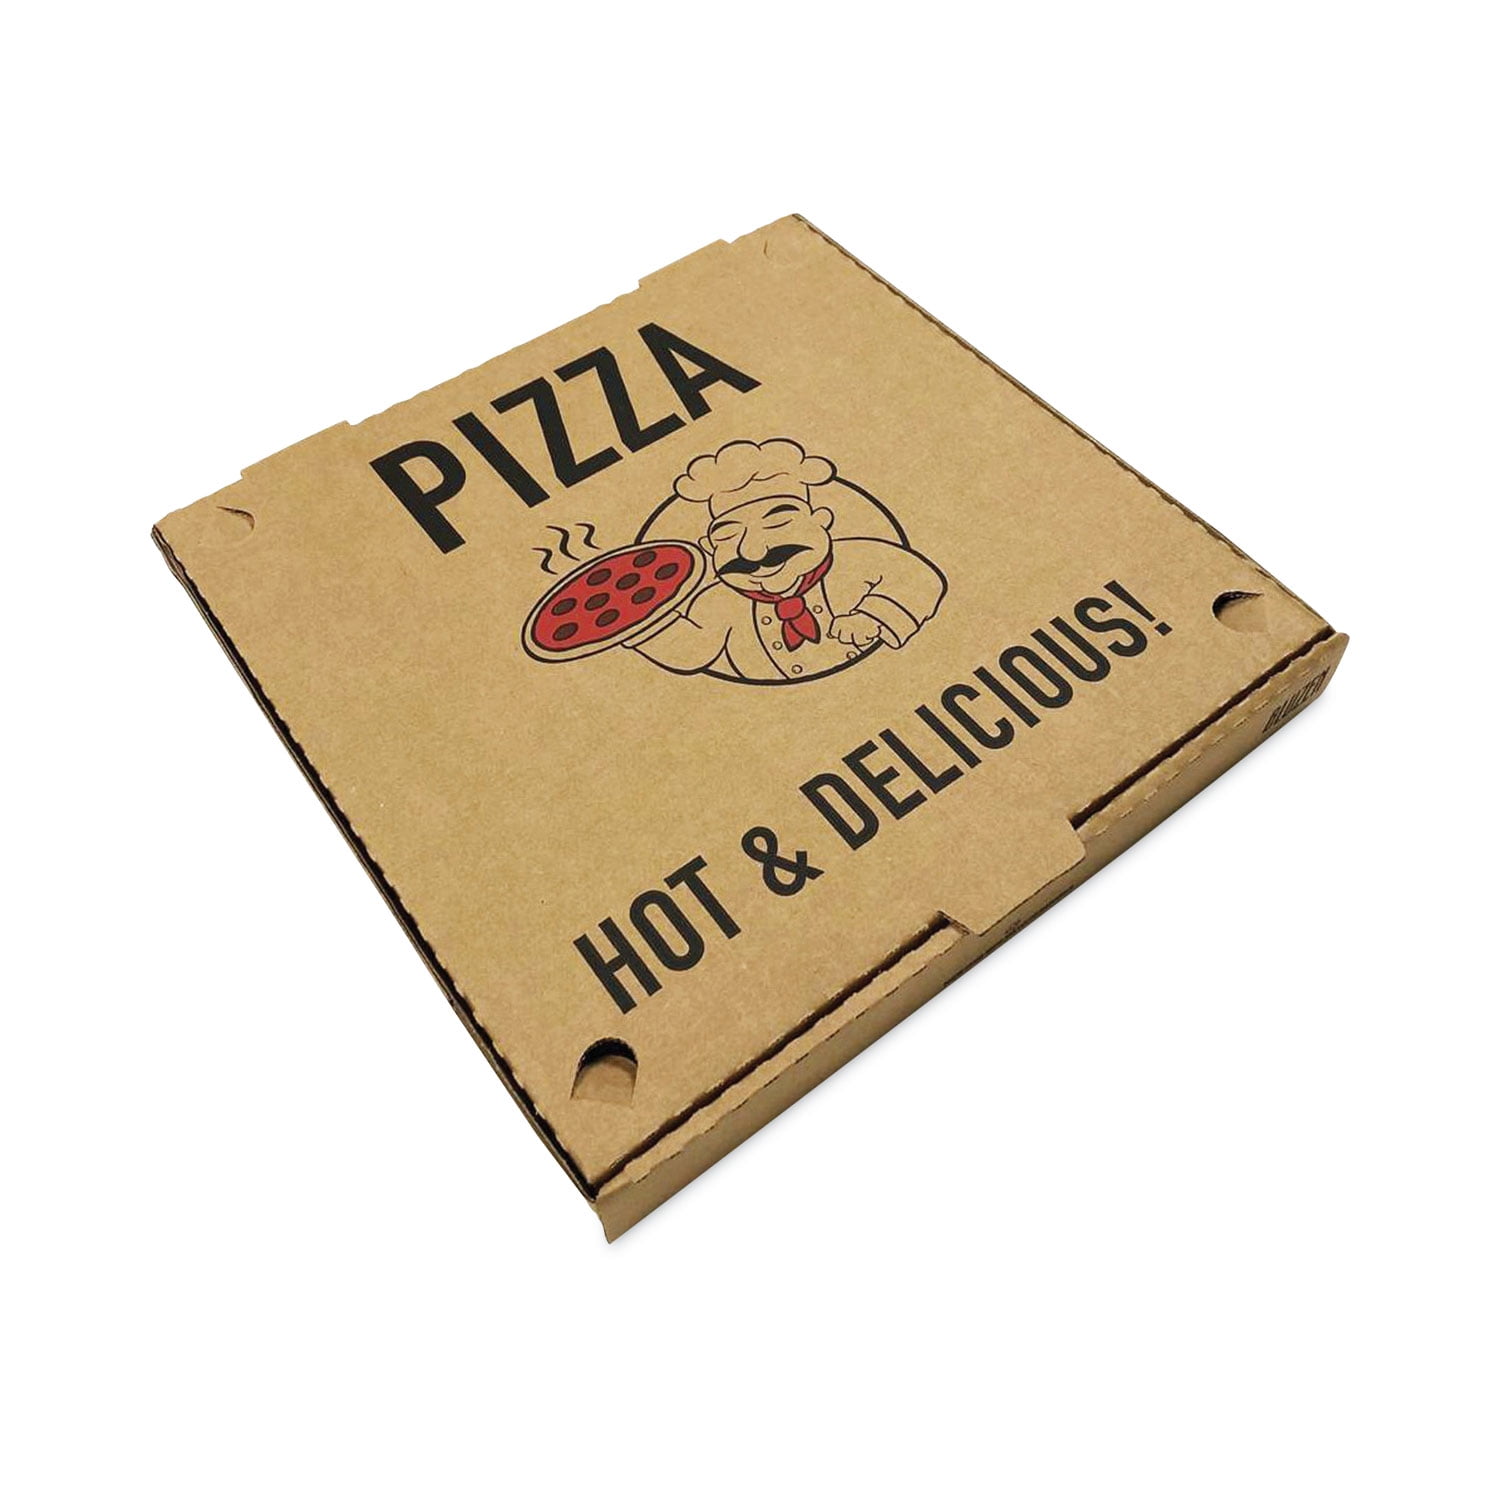 9X9X1.5 Inches Brown Corrugated Pizza Box 5 Ply (Pack of 50)